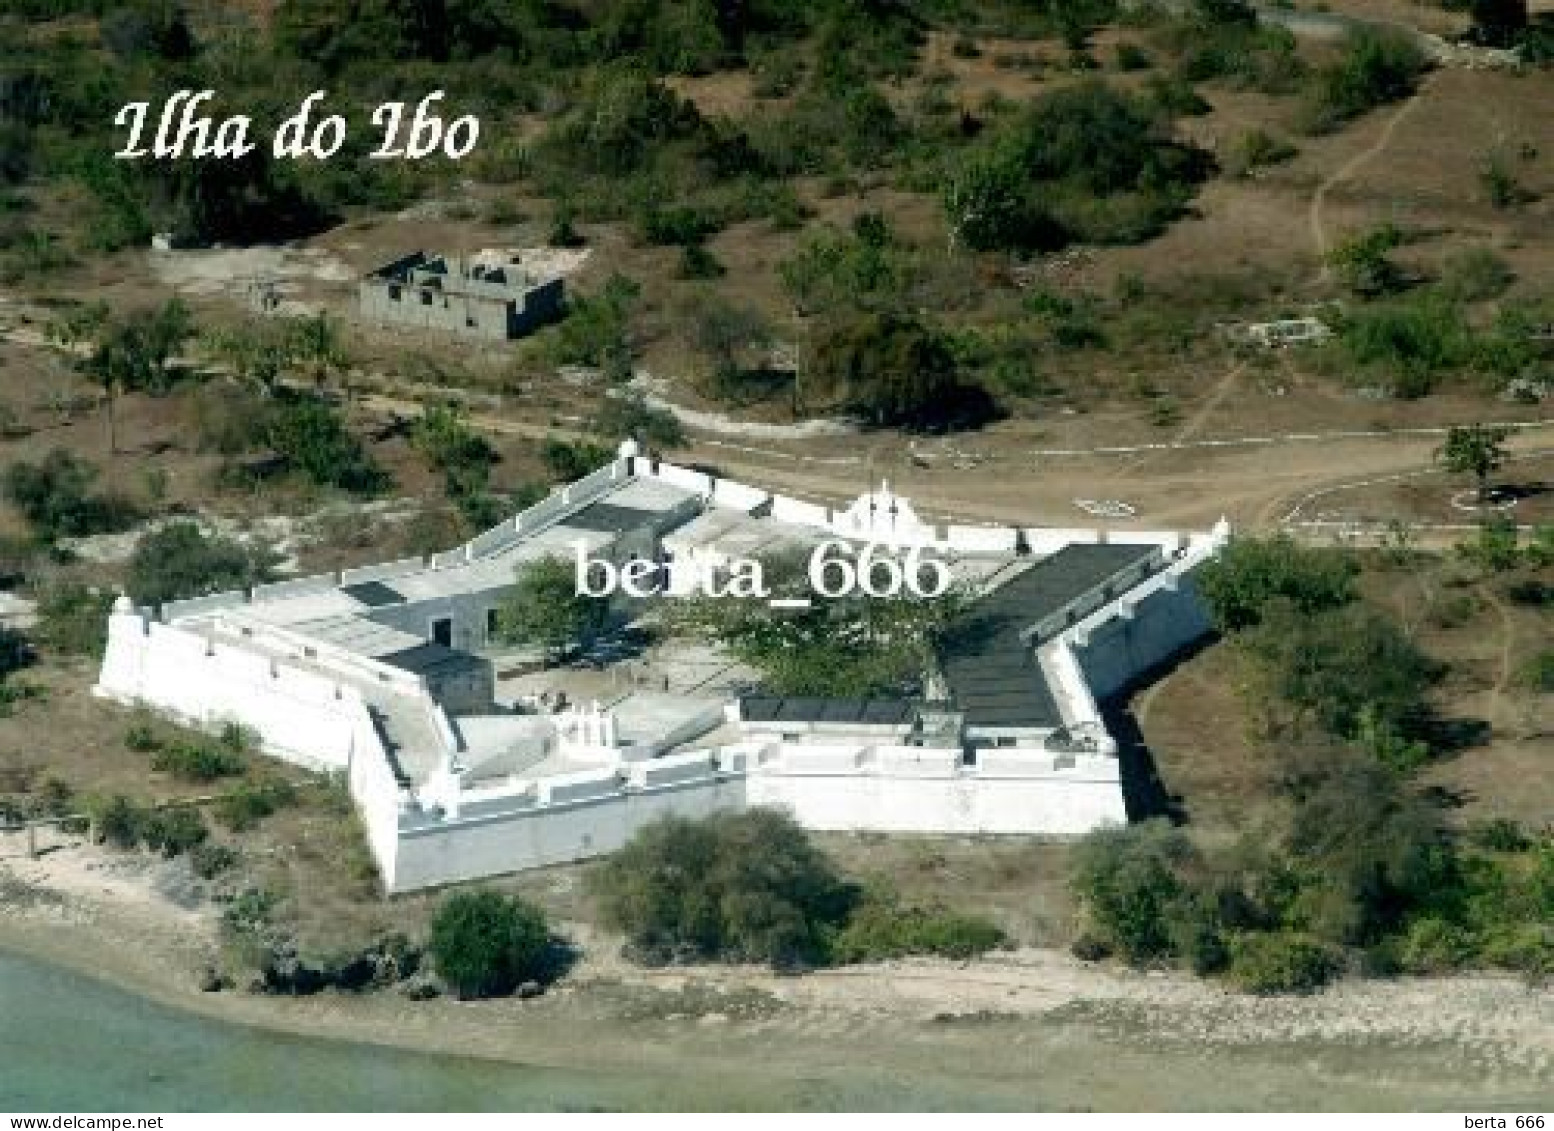 Mozambique Ibo Island Fort Aerial View New Postcard - Mozambique